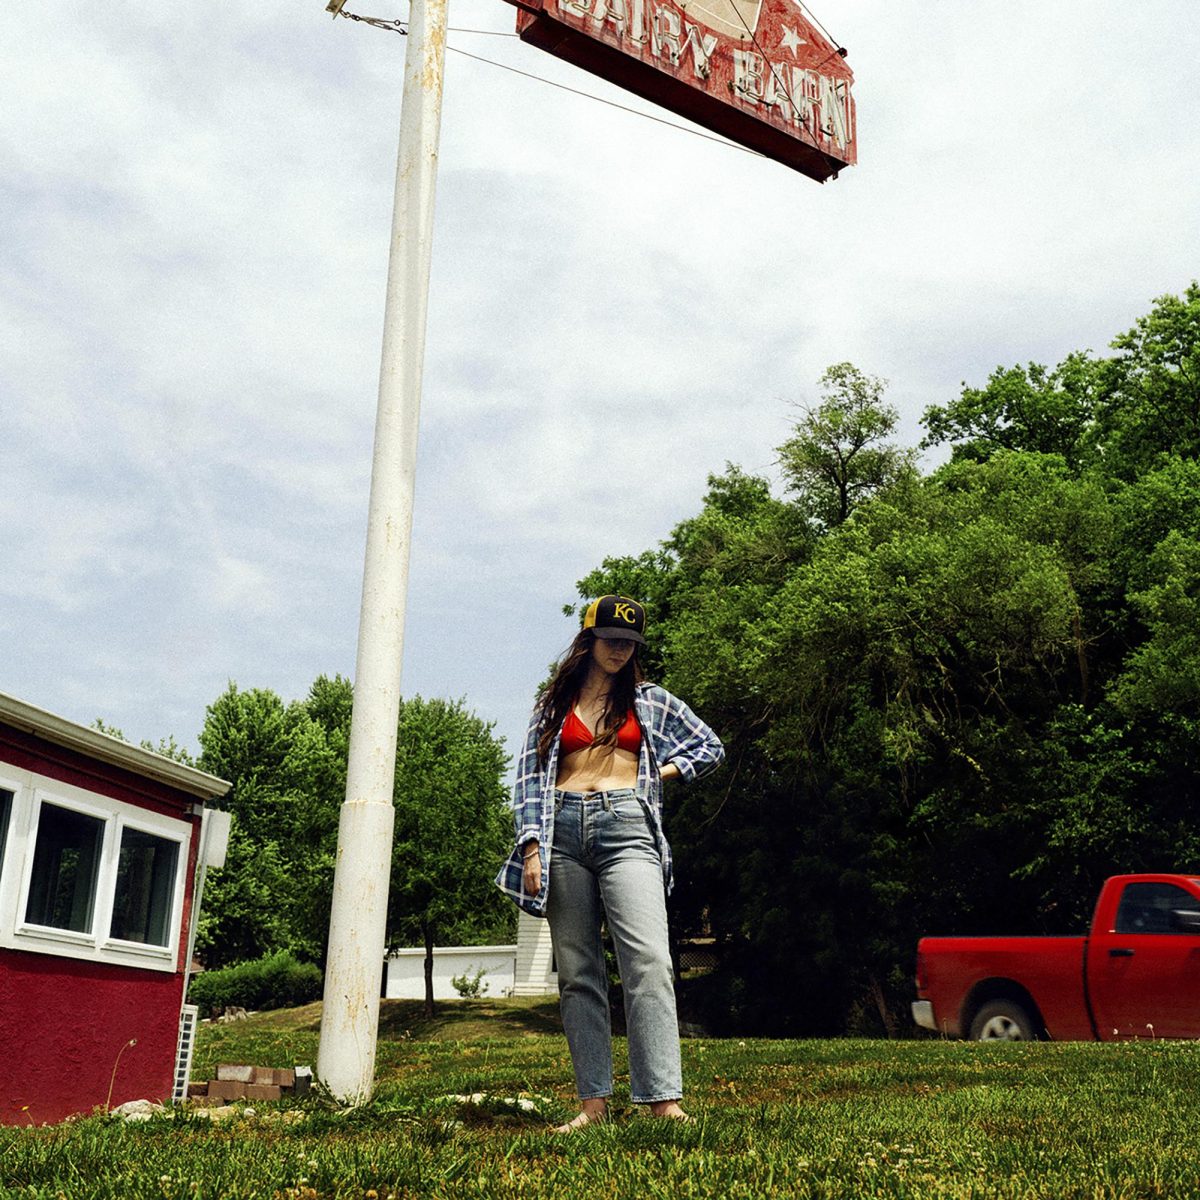 A woman stands beside an old neon scene with some trees and a red pickup in the background. This image is the cover to Waxahatchees newest album Tigers Blood, one of three major indie-folk albums to release this week. (ANTI Records via AP)